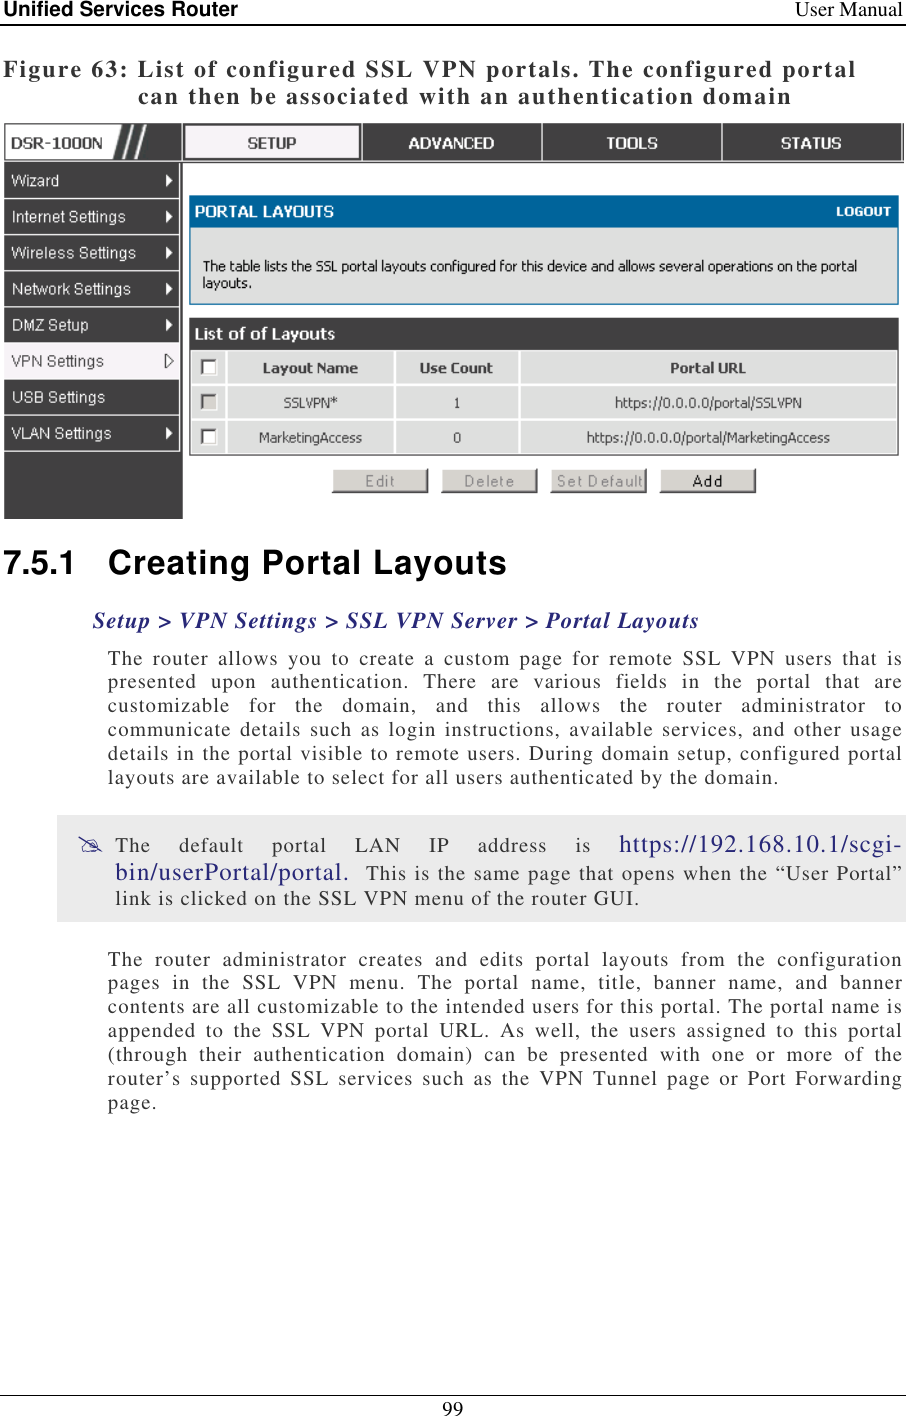 Unified Services Router    User Manual 99  Figure 63: List of configured SSL VPN portals. The configured portal can then be associated with an authentication domain  7.5.1  Creating Portal Layouts Setup &gt; VPN Settings &gt; SSL VPN Server &gt; Portal Layouts The  router  allows  you  to  create  a  custom  page  for  remote  SSL  VPN  users  that  is presented  upon  authentication.  There  are  various  fields  in  the  portal  that  are customizable  for  the  domain,  and  this  allows  the  router  administrator  to communicate  details  such  as login  instructions,  available services,  and  other usage details in the portal visible to remote users. During domain setup, configured portal layouts are available to select for all users authenticated by the domain.   The  default  portal  LAN  IP  address  is  https://192.168.10.1/scgi-bin/userPortal/portal.  This is the same page that opens when the “User Portal” link is clicked on the SSL VPN menu of the router GUI.  The  router  administrator  creates  and  edits  portal  layouts  from  the  configuration pages  in  the  SSL  VPN  menu.  The  portal  name,  title,  banner  name,  and  banner contents are all customizable to the intended users for this portal. The portal name is appended  to  the  SSL  VPN  portal  URL.  As  well,  the  users  assigned  to  this  portal (through  their  authentication  domain)  can  be  presented  with  one  or  more  of  the router’s  supported  SSL  services  such  as  the  VPN  Tunnel  page  or  Port  Forwarding page.  